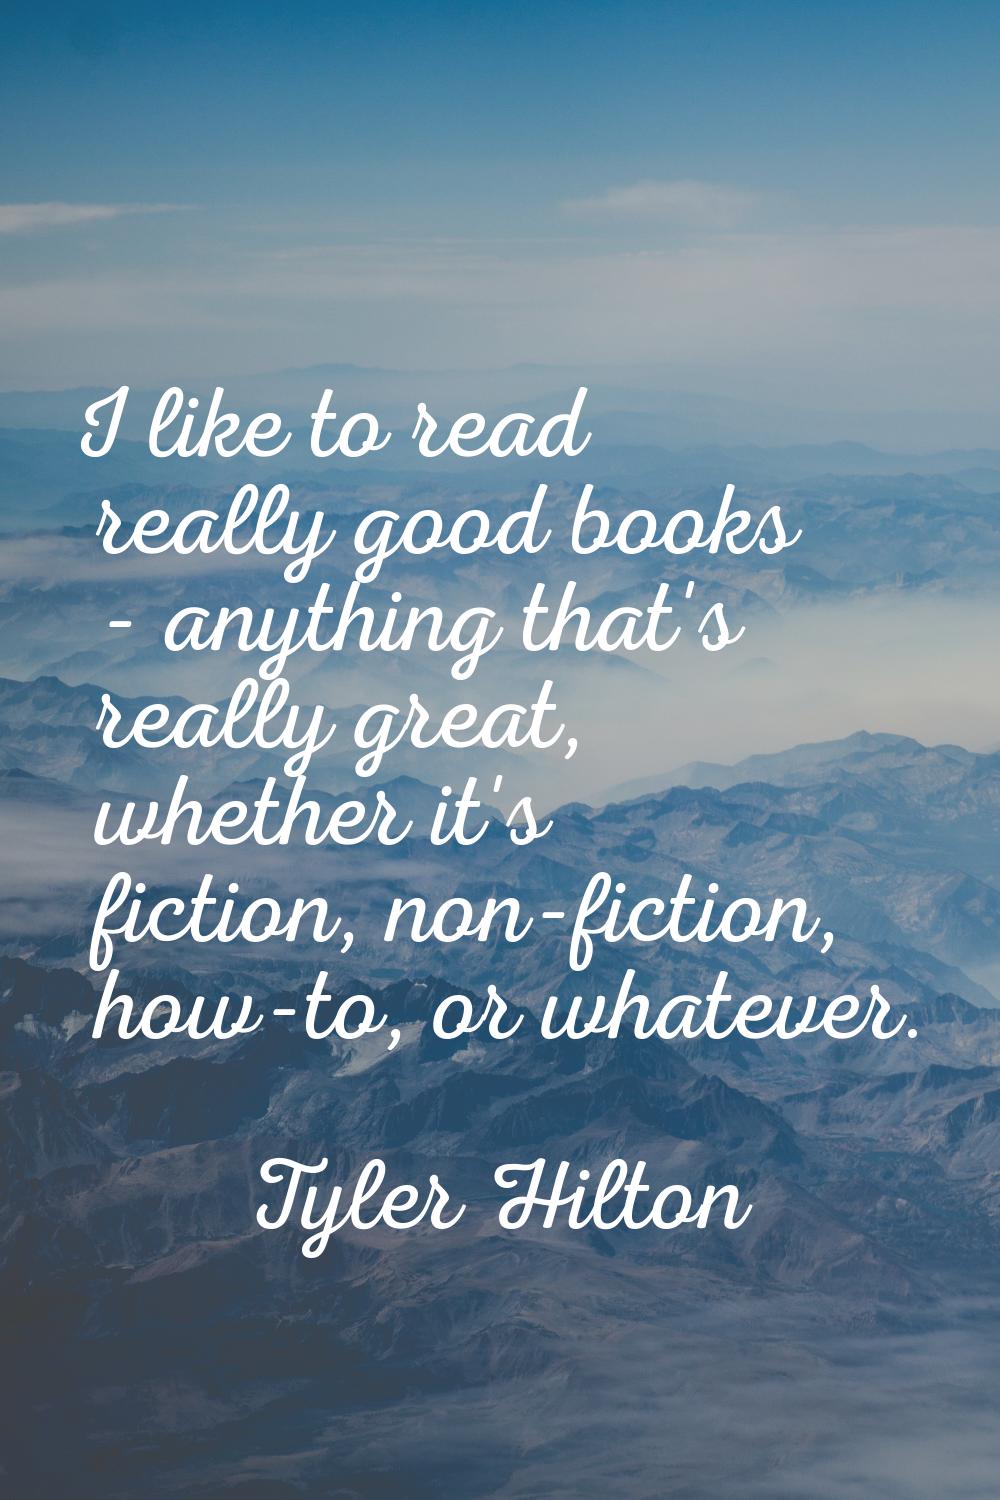 I like to read really good books - anything that's really great, whether it's fiction, non-fiction,